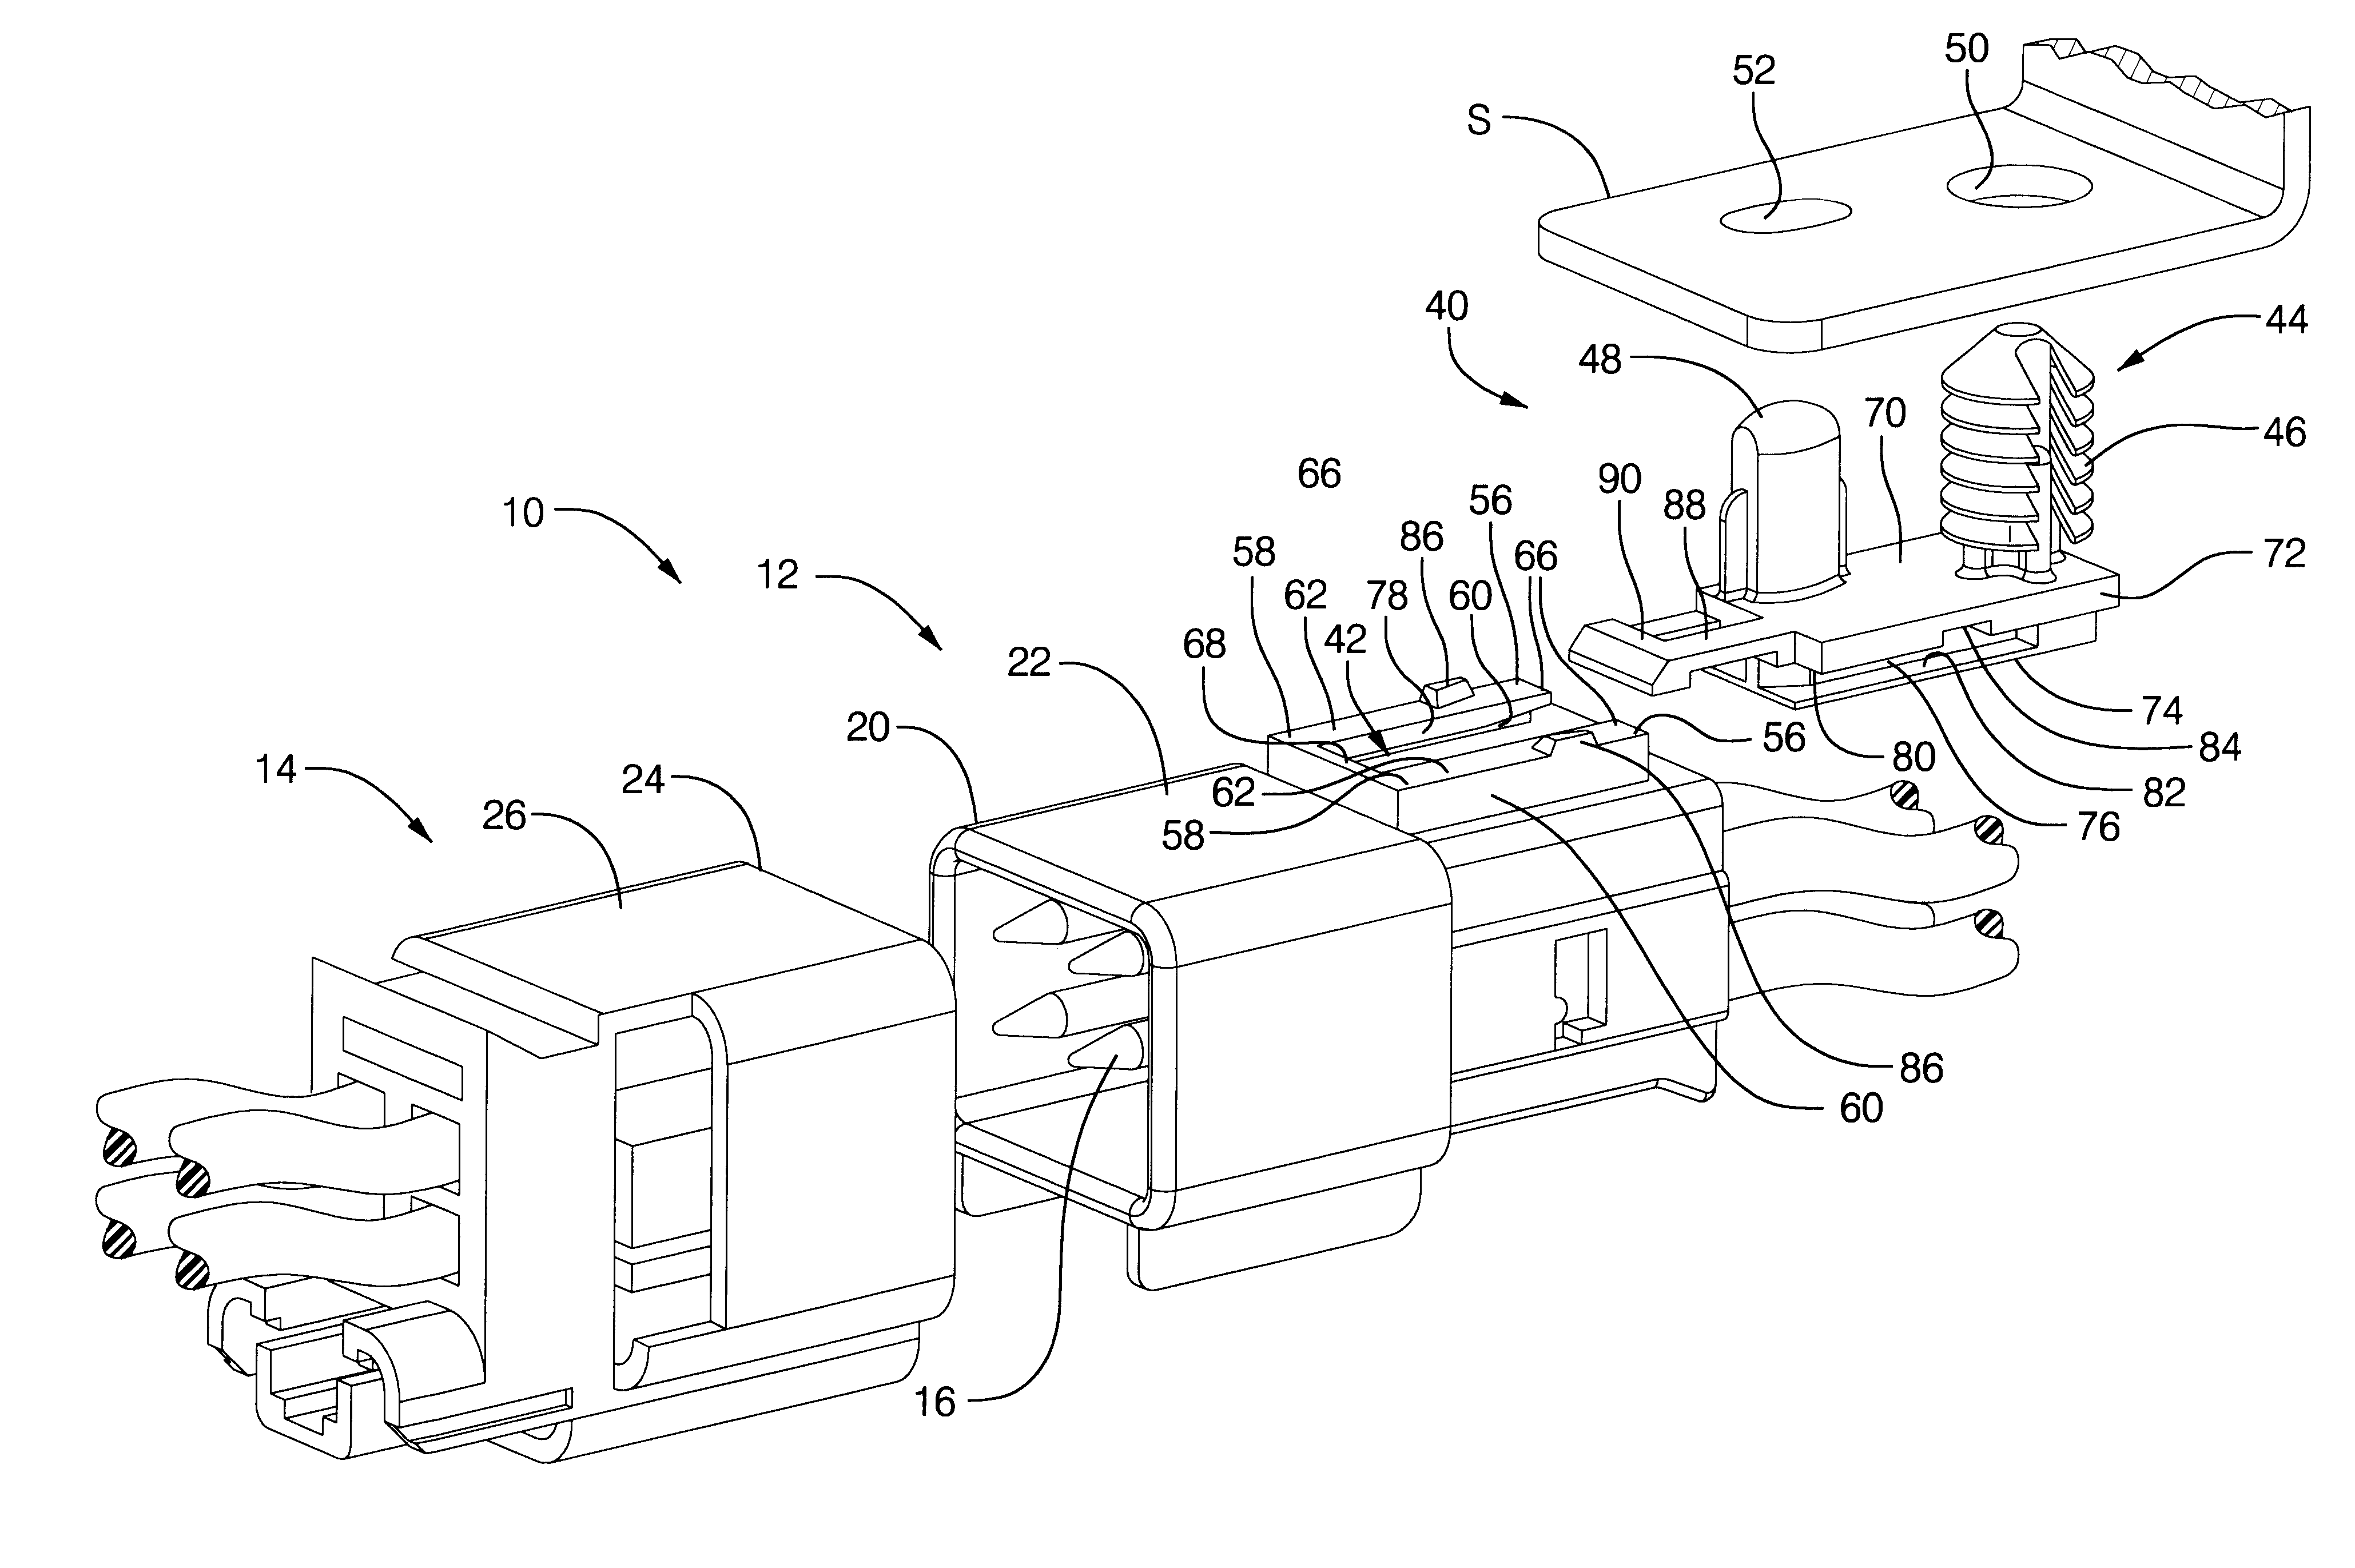 Electrical connector having slide clip attachment